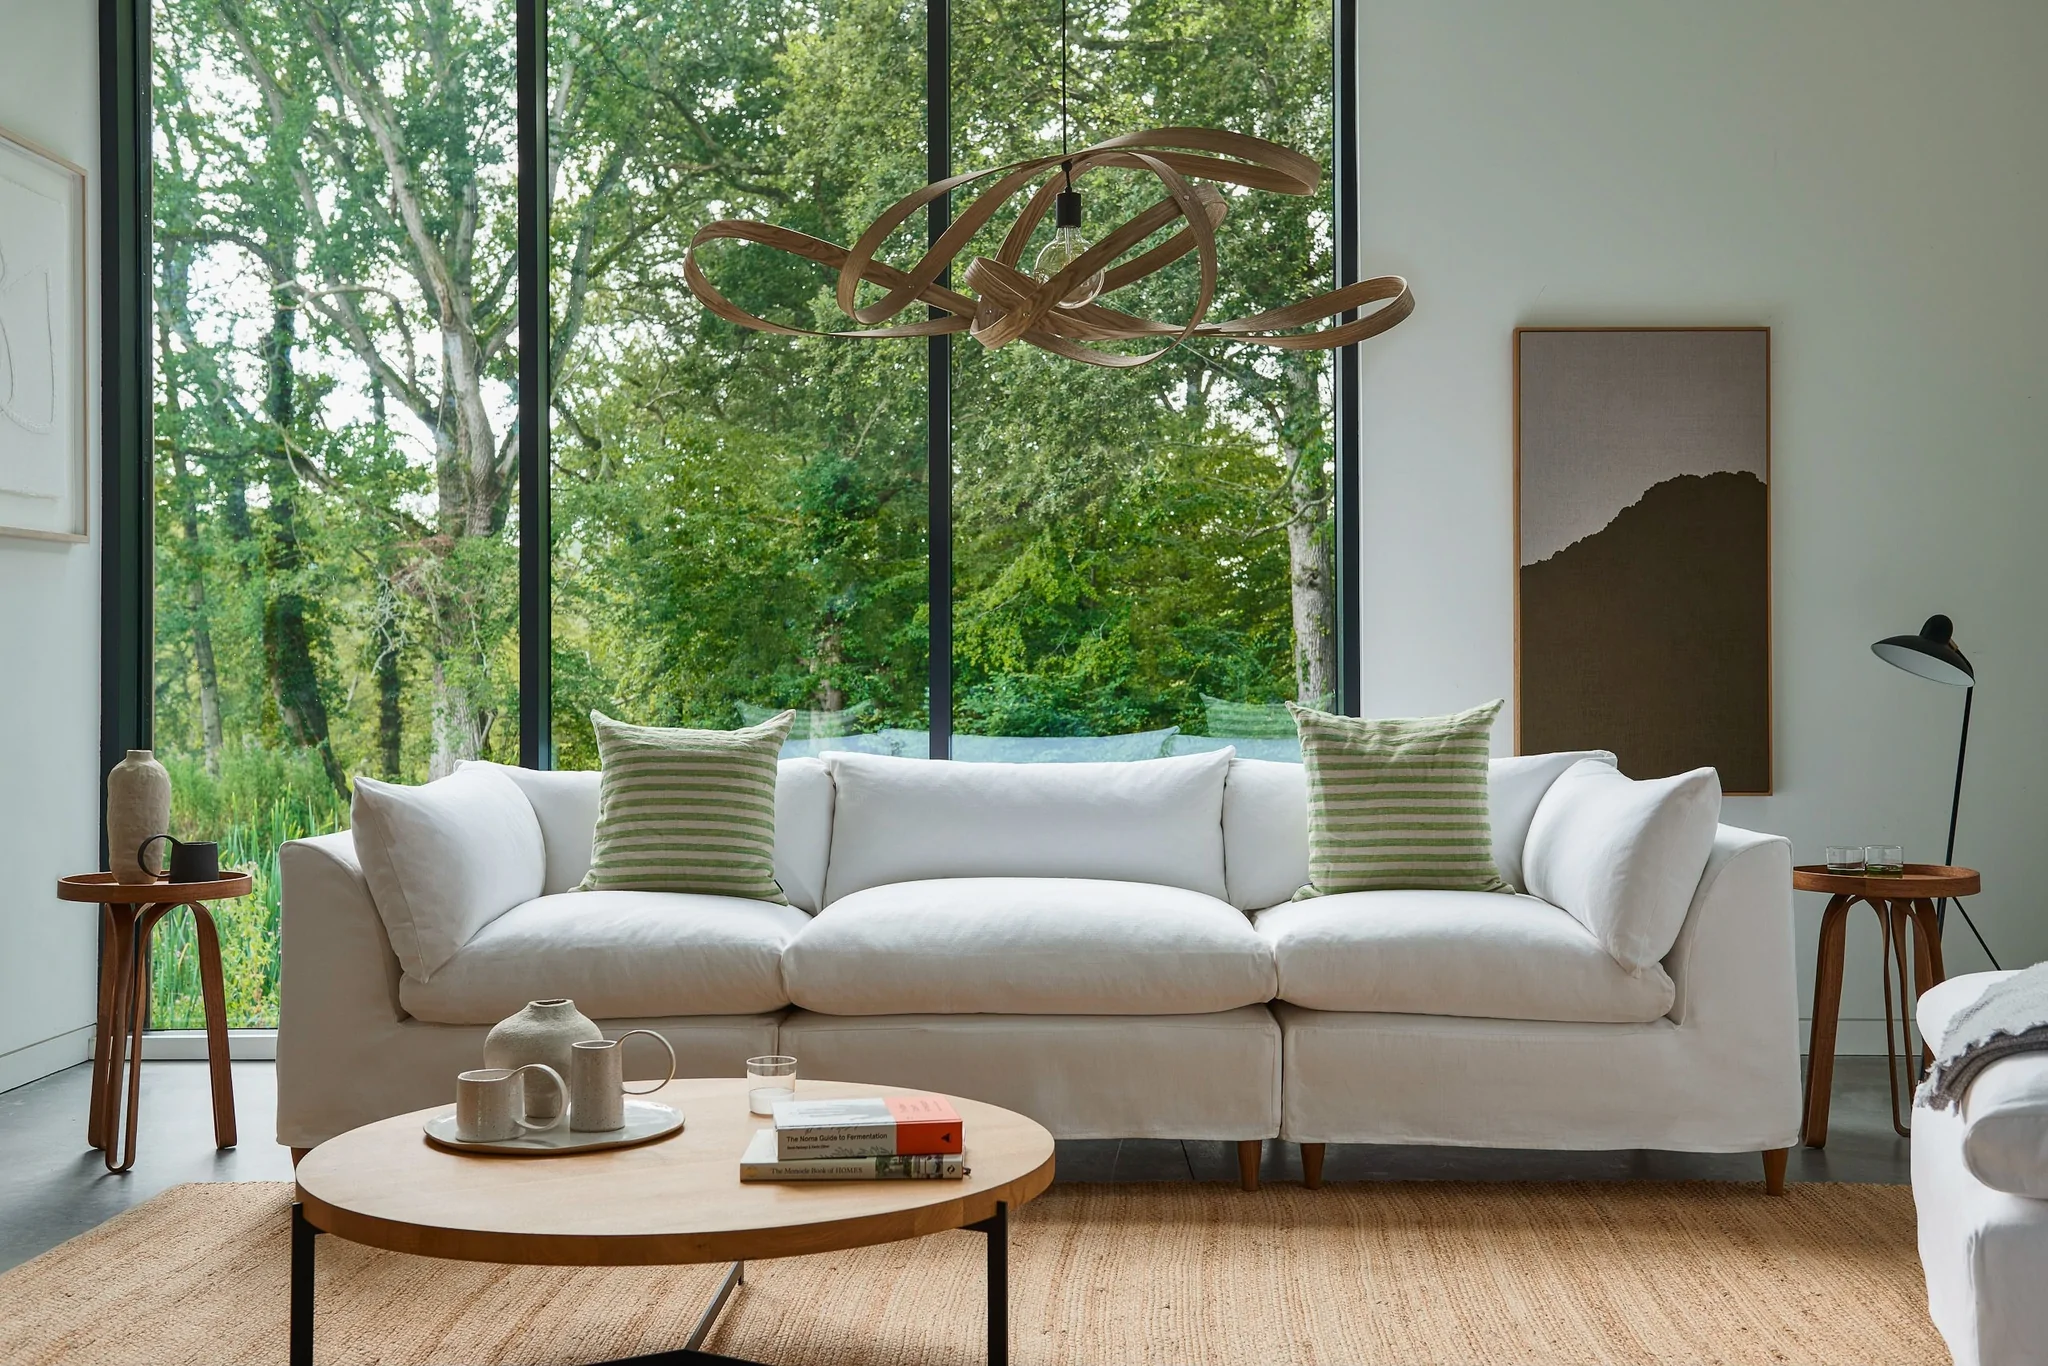 Orlando modular large sofa in a modern living room setting by Maker and Son.